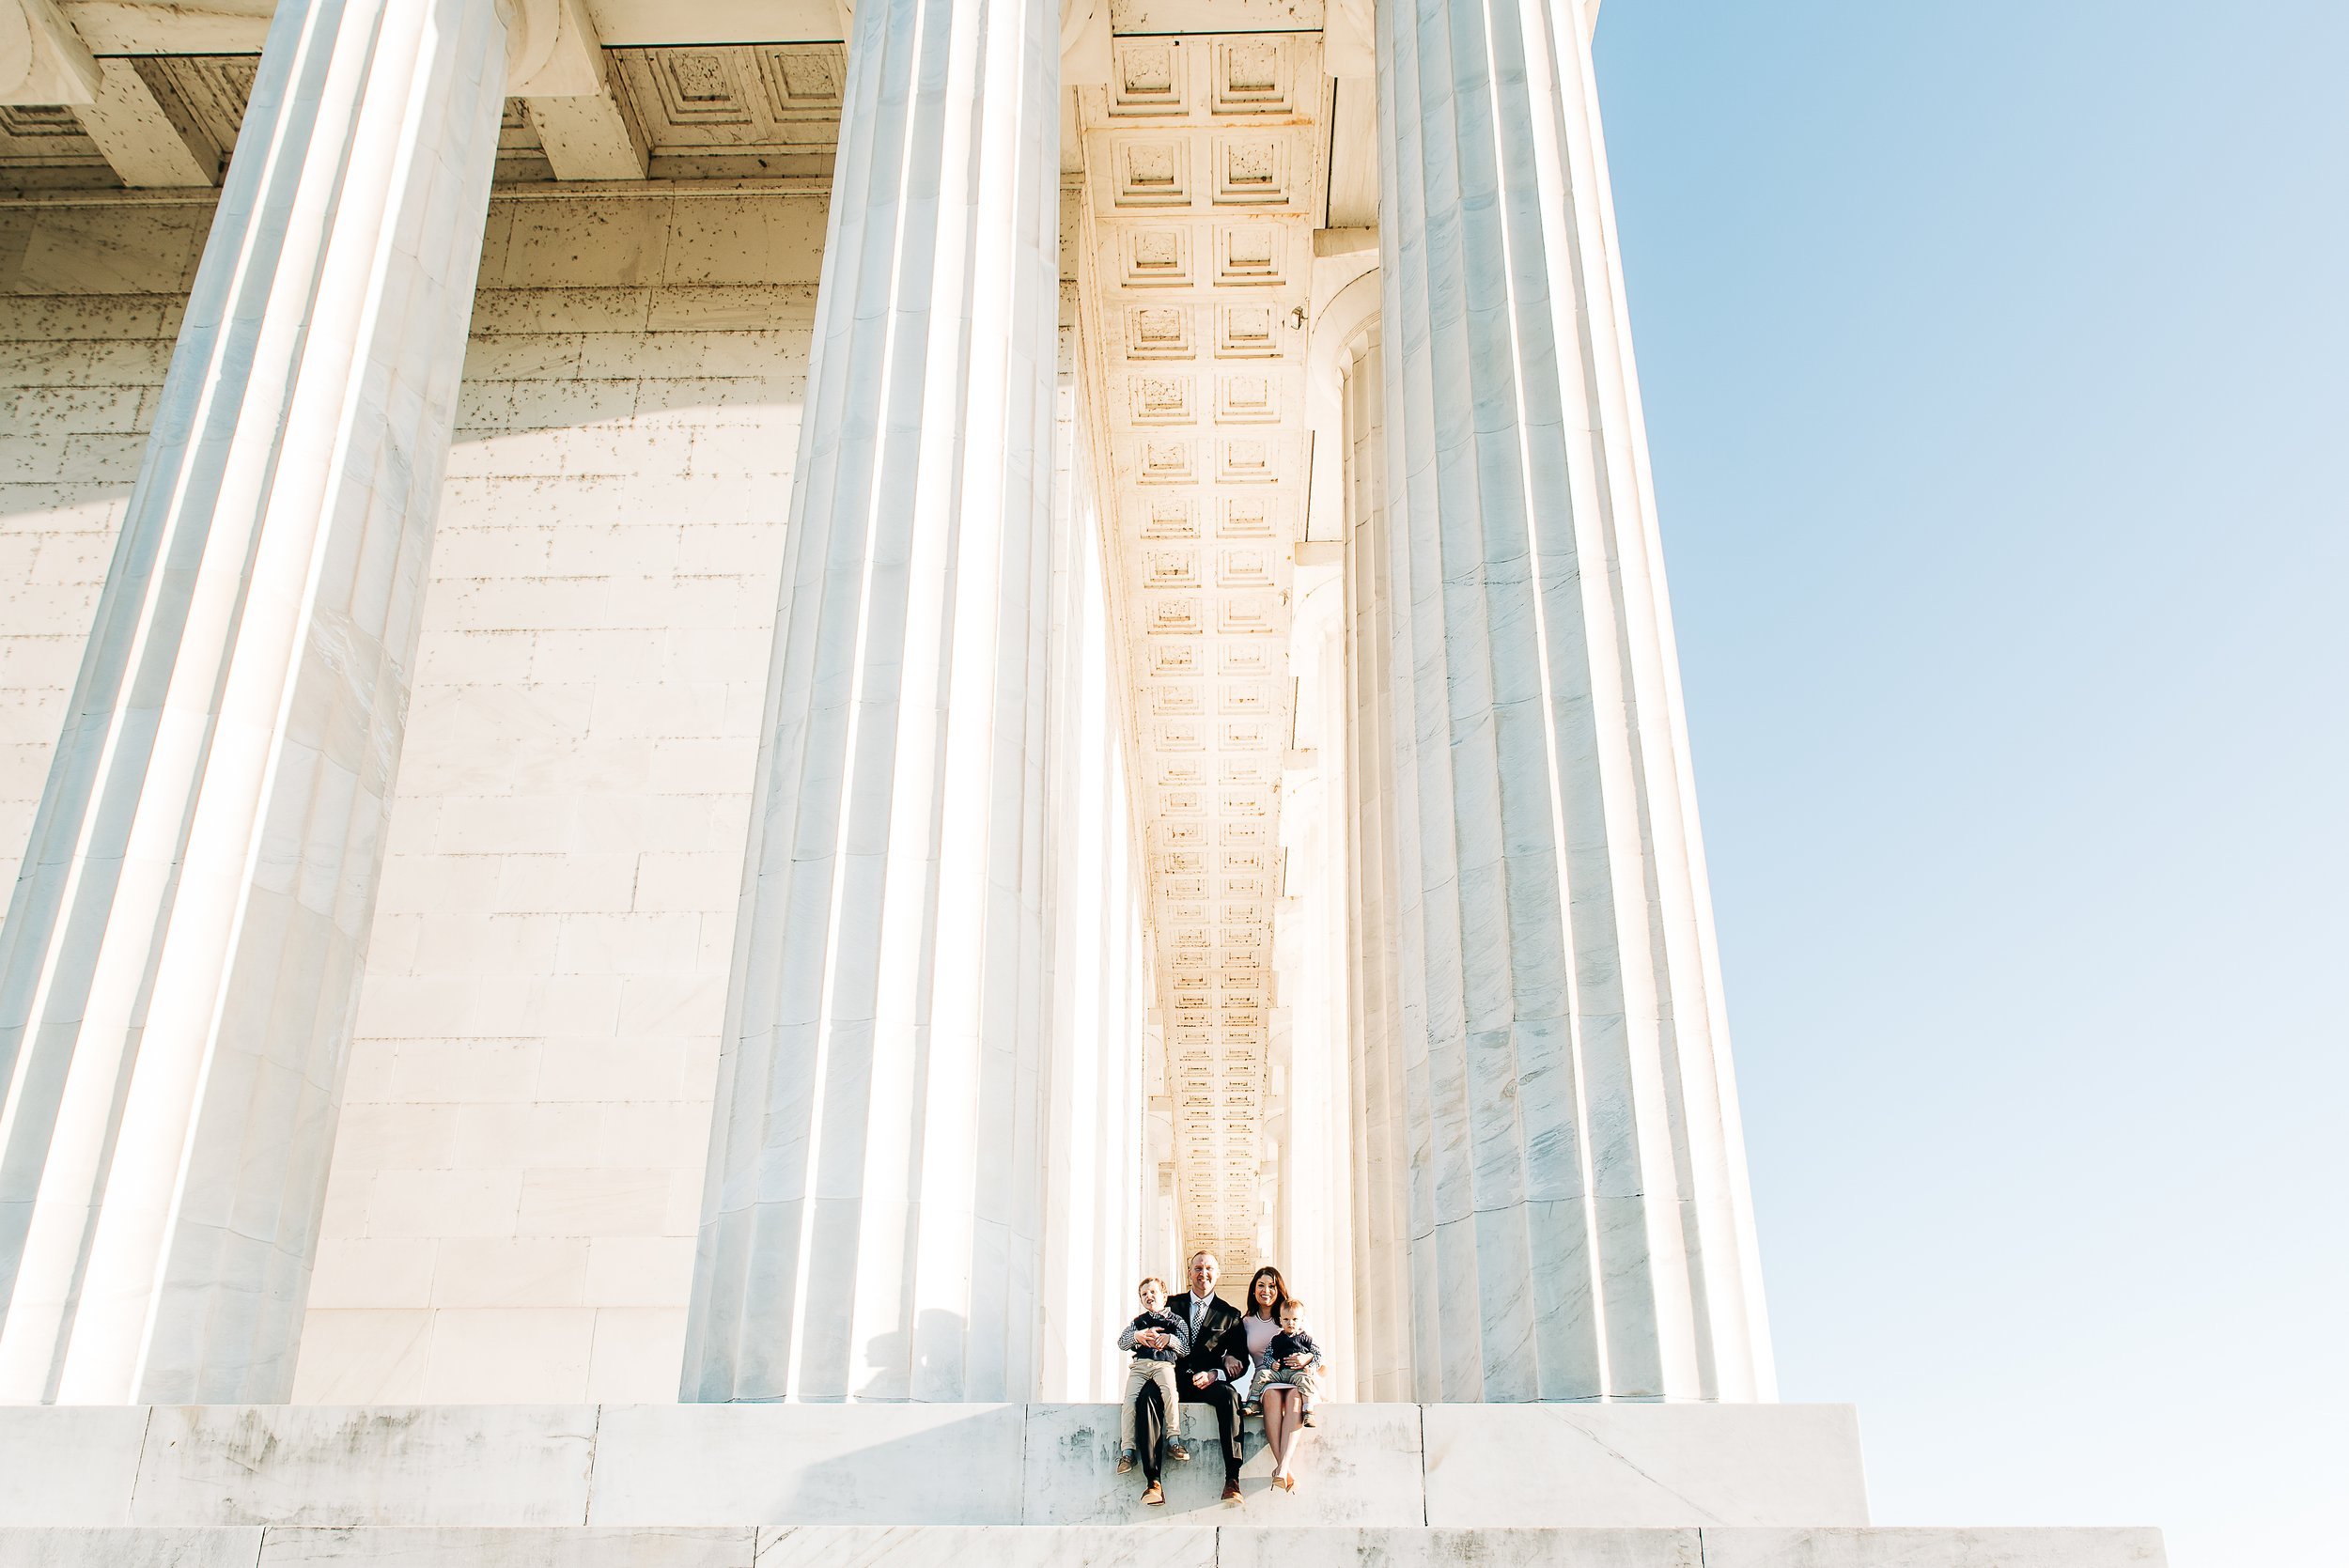  DC Family Portraits at Lincoln Memorial 